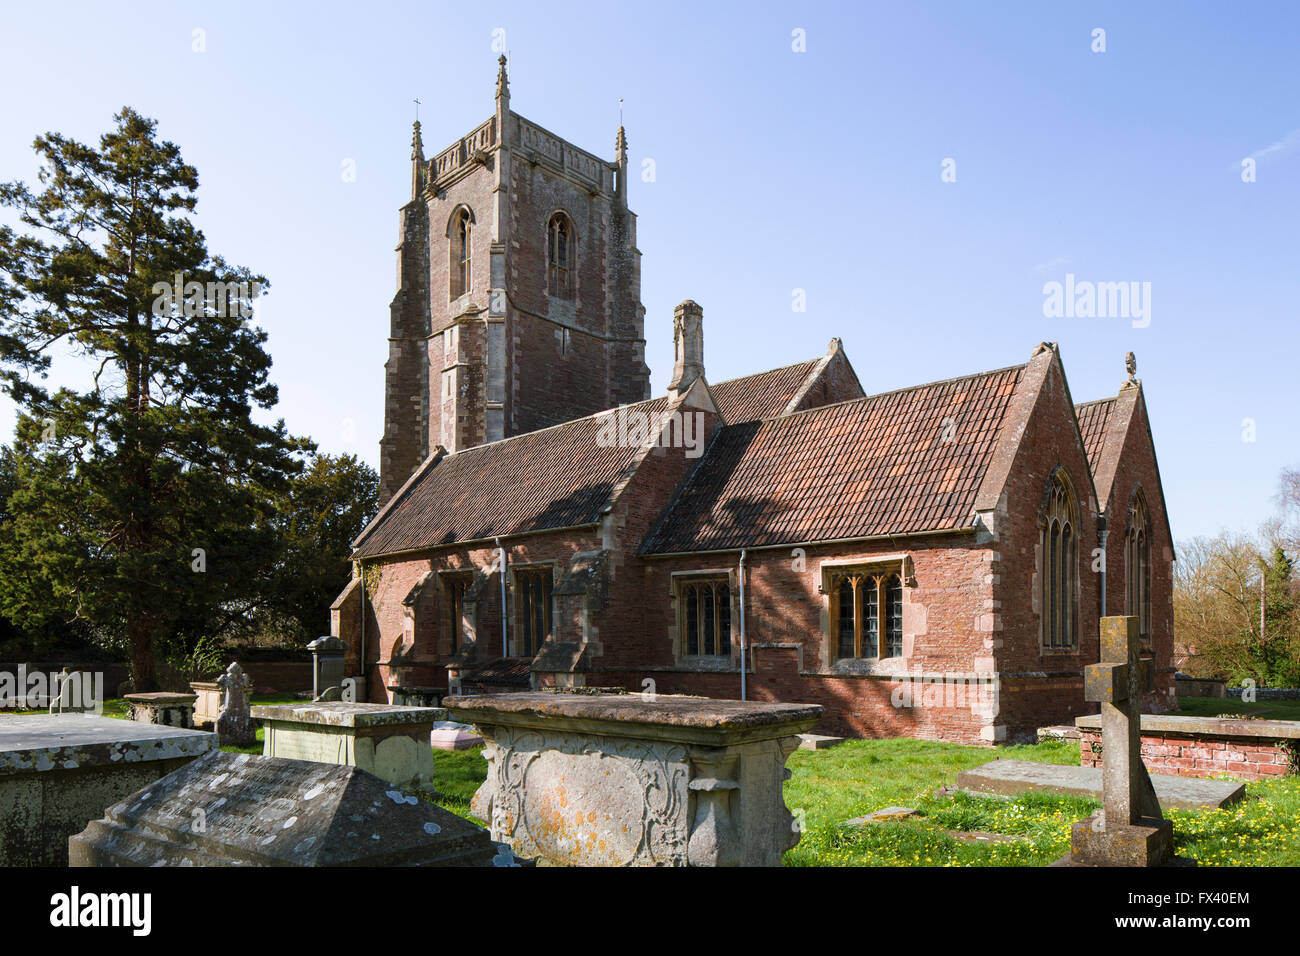 The medieval church of St James the Less, Iron Acton, South Gloucestershire, UK, 1300s-1400s. Stock Photo